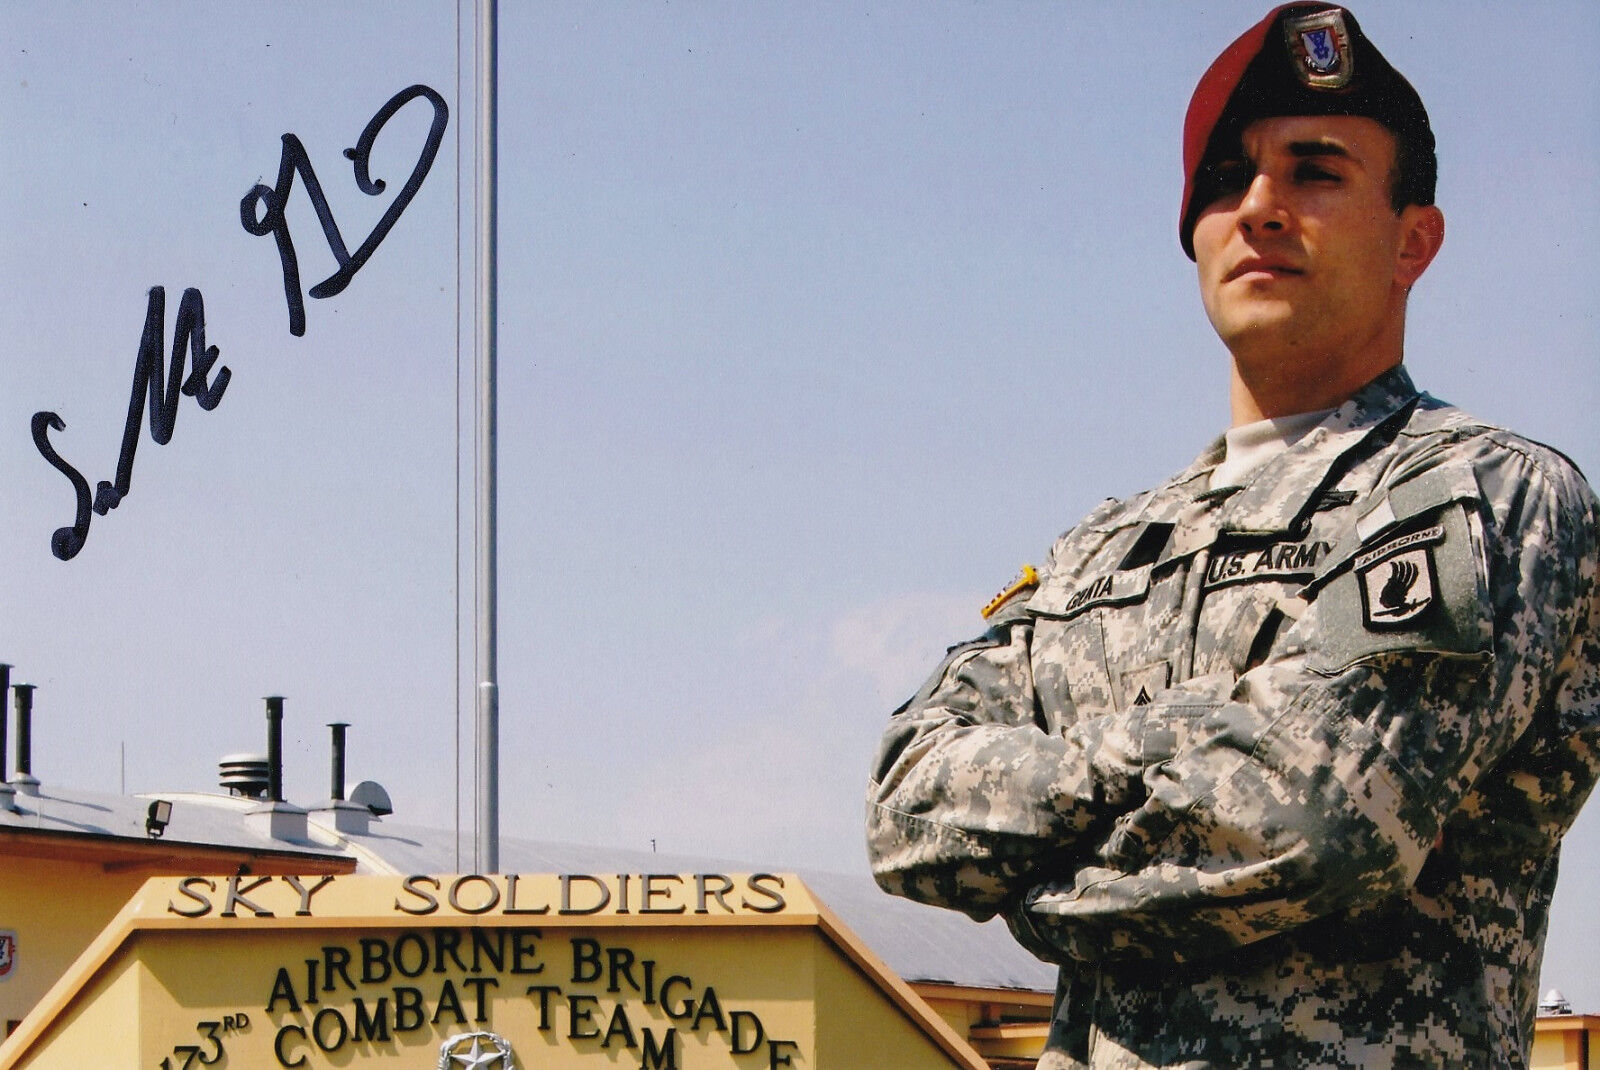 Sal Giunta SIgned Autographed 4x6 Photo Poster painting CMOH MOH Afghanistan 173rd Airborne Army